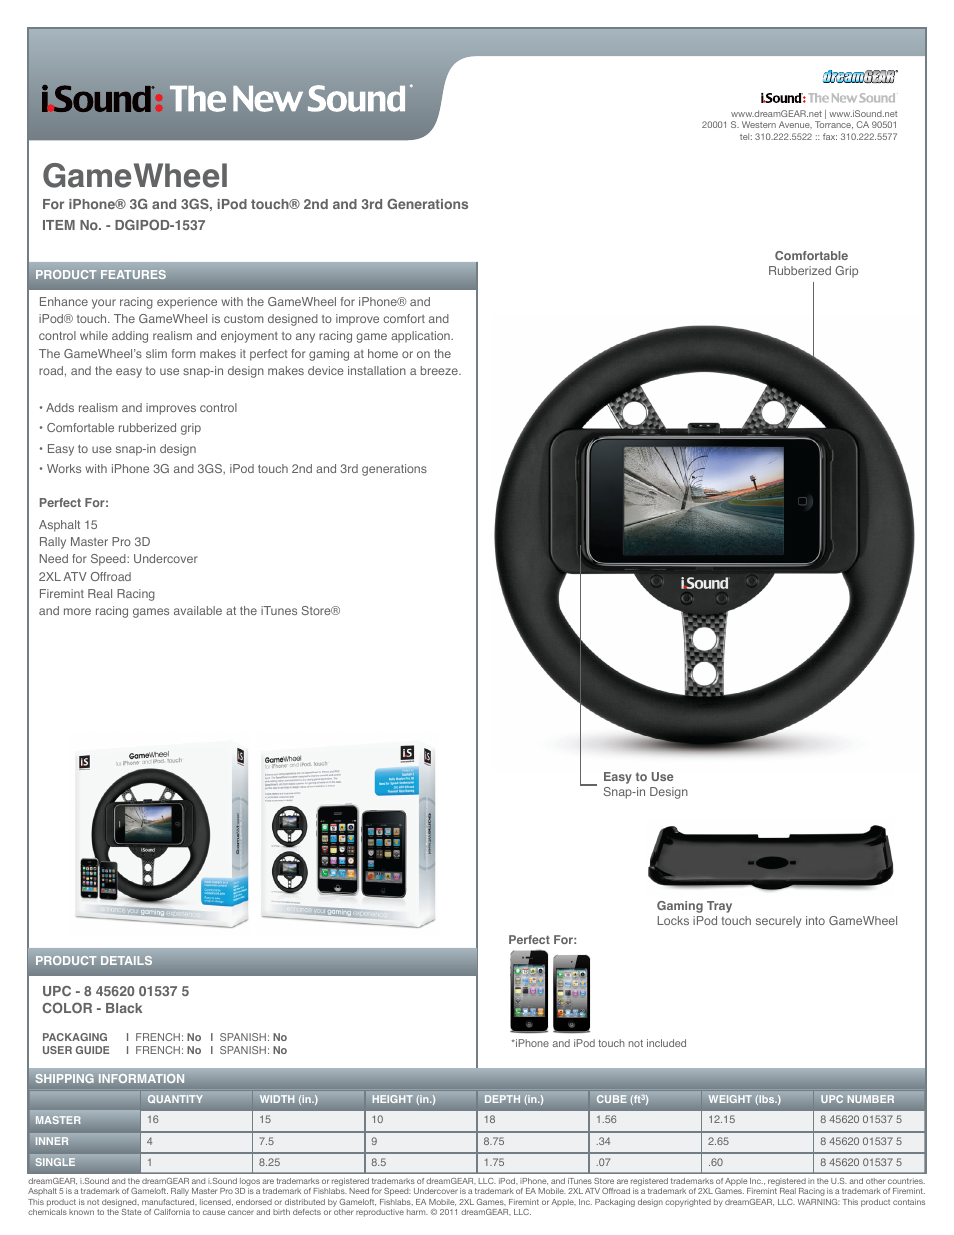 GameWheel for iPhones & iPod Touch - Sell Sheet